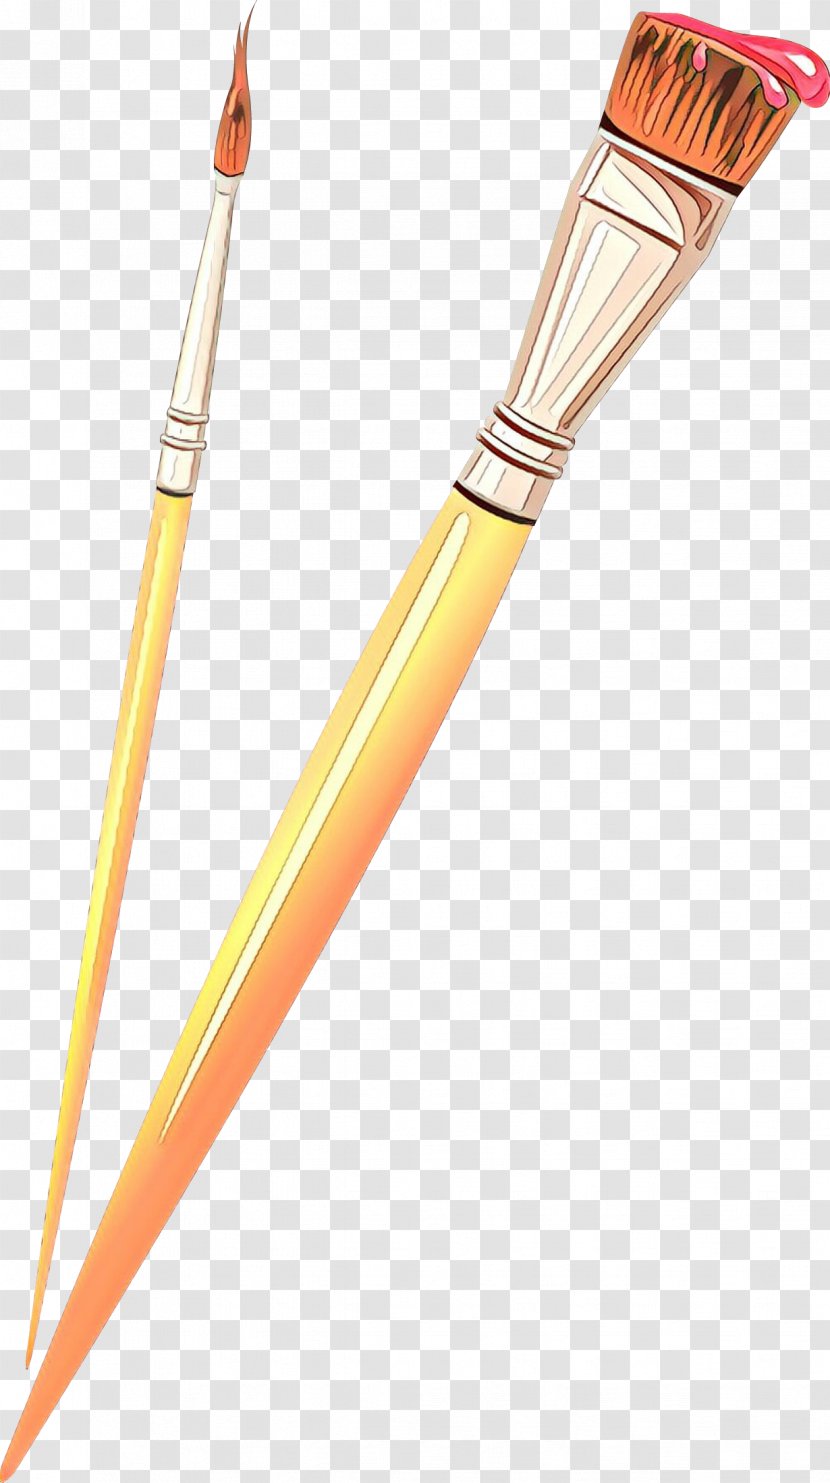 Pen And Notebook - Painting - Paint Brush Transparent PNG